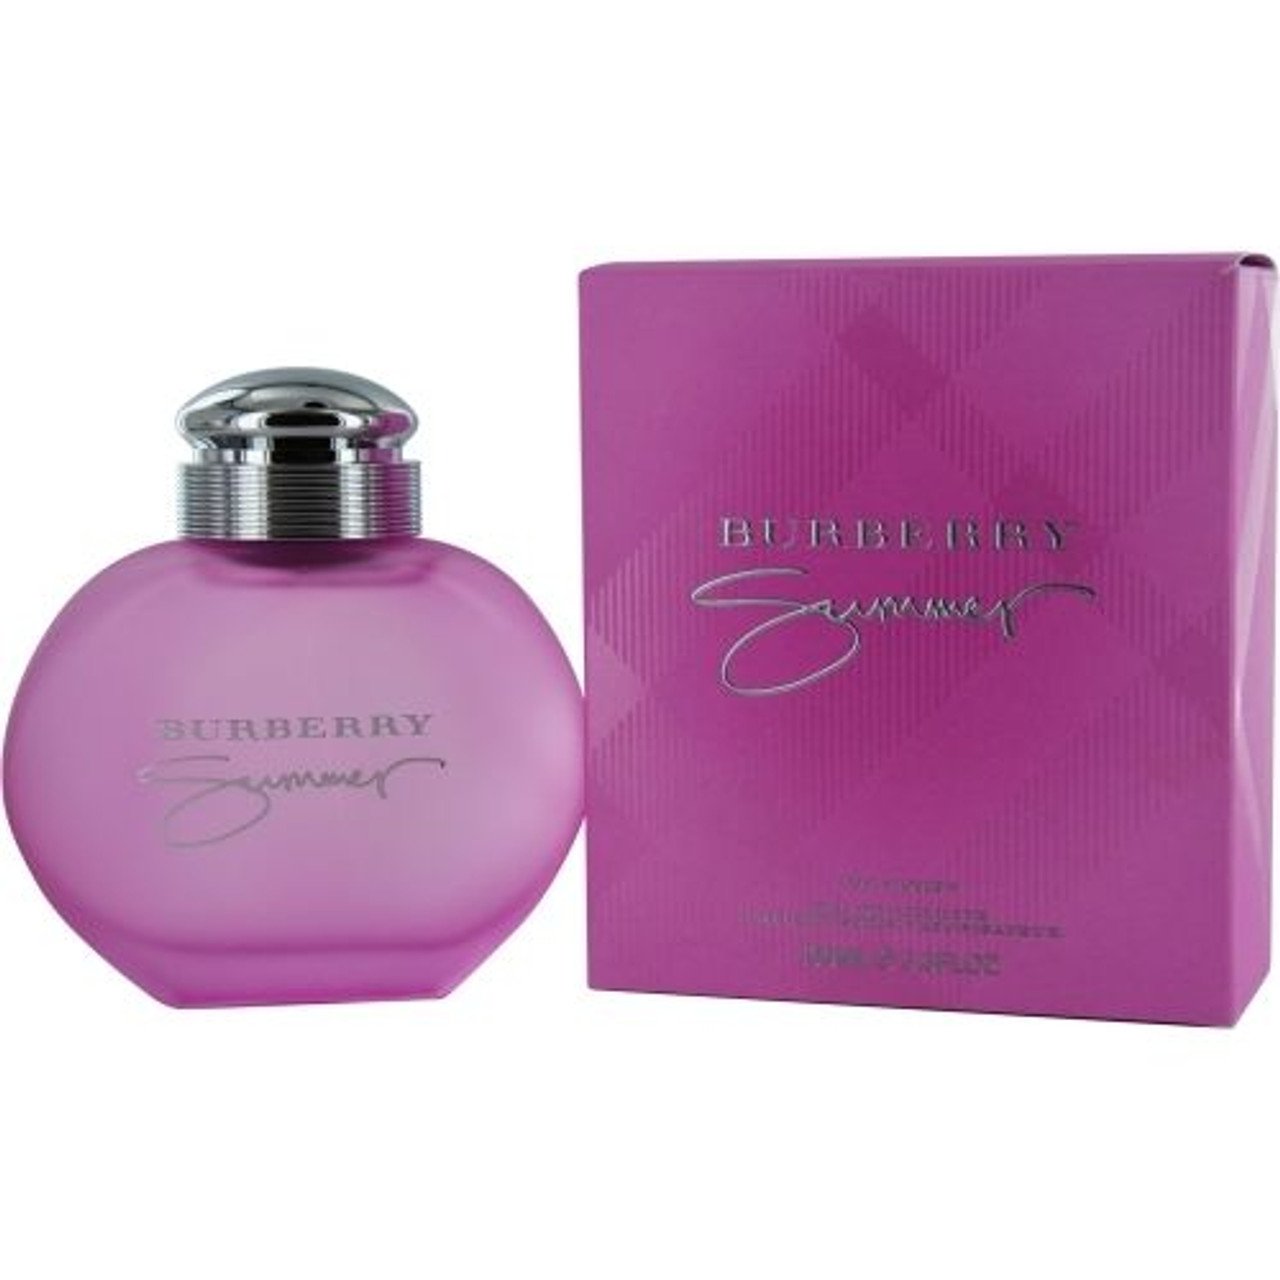 Burberry Summer 2013 by Burberry 3.4 oz EDT for women - ForeverLux